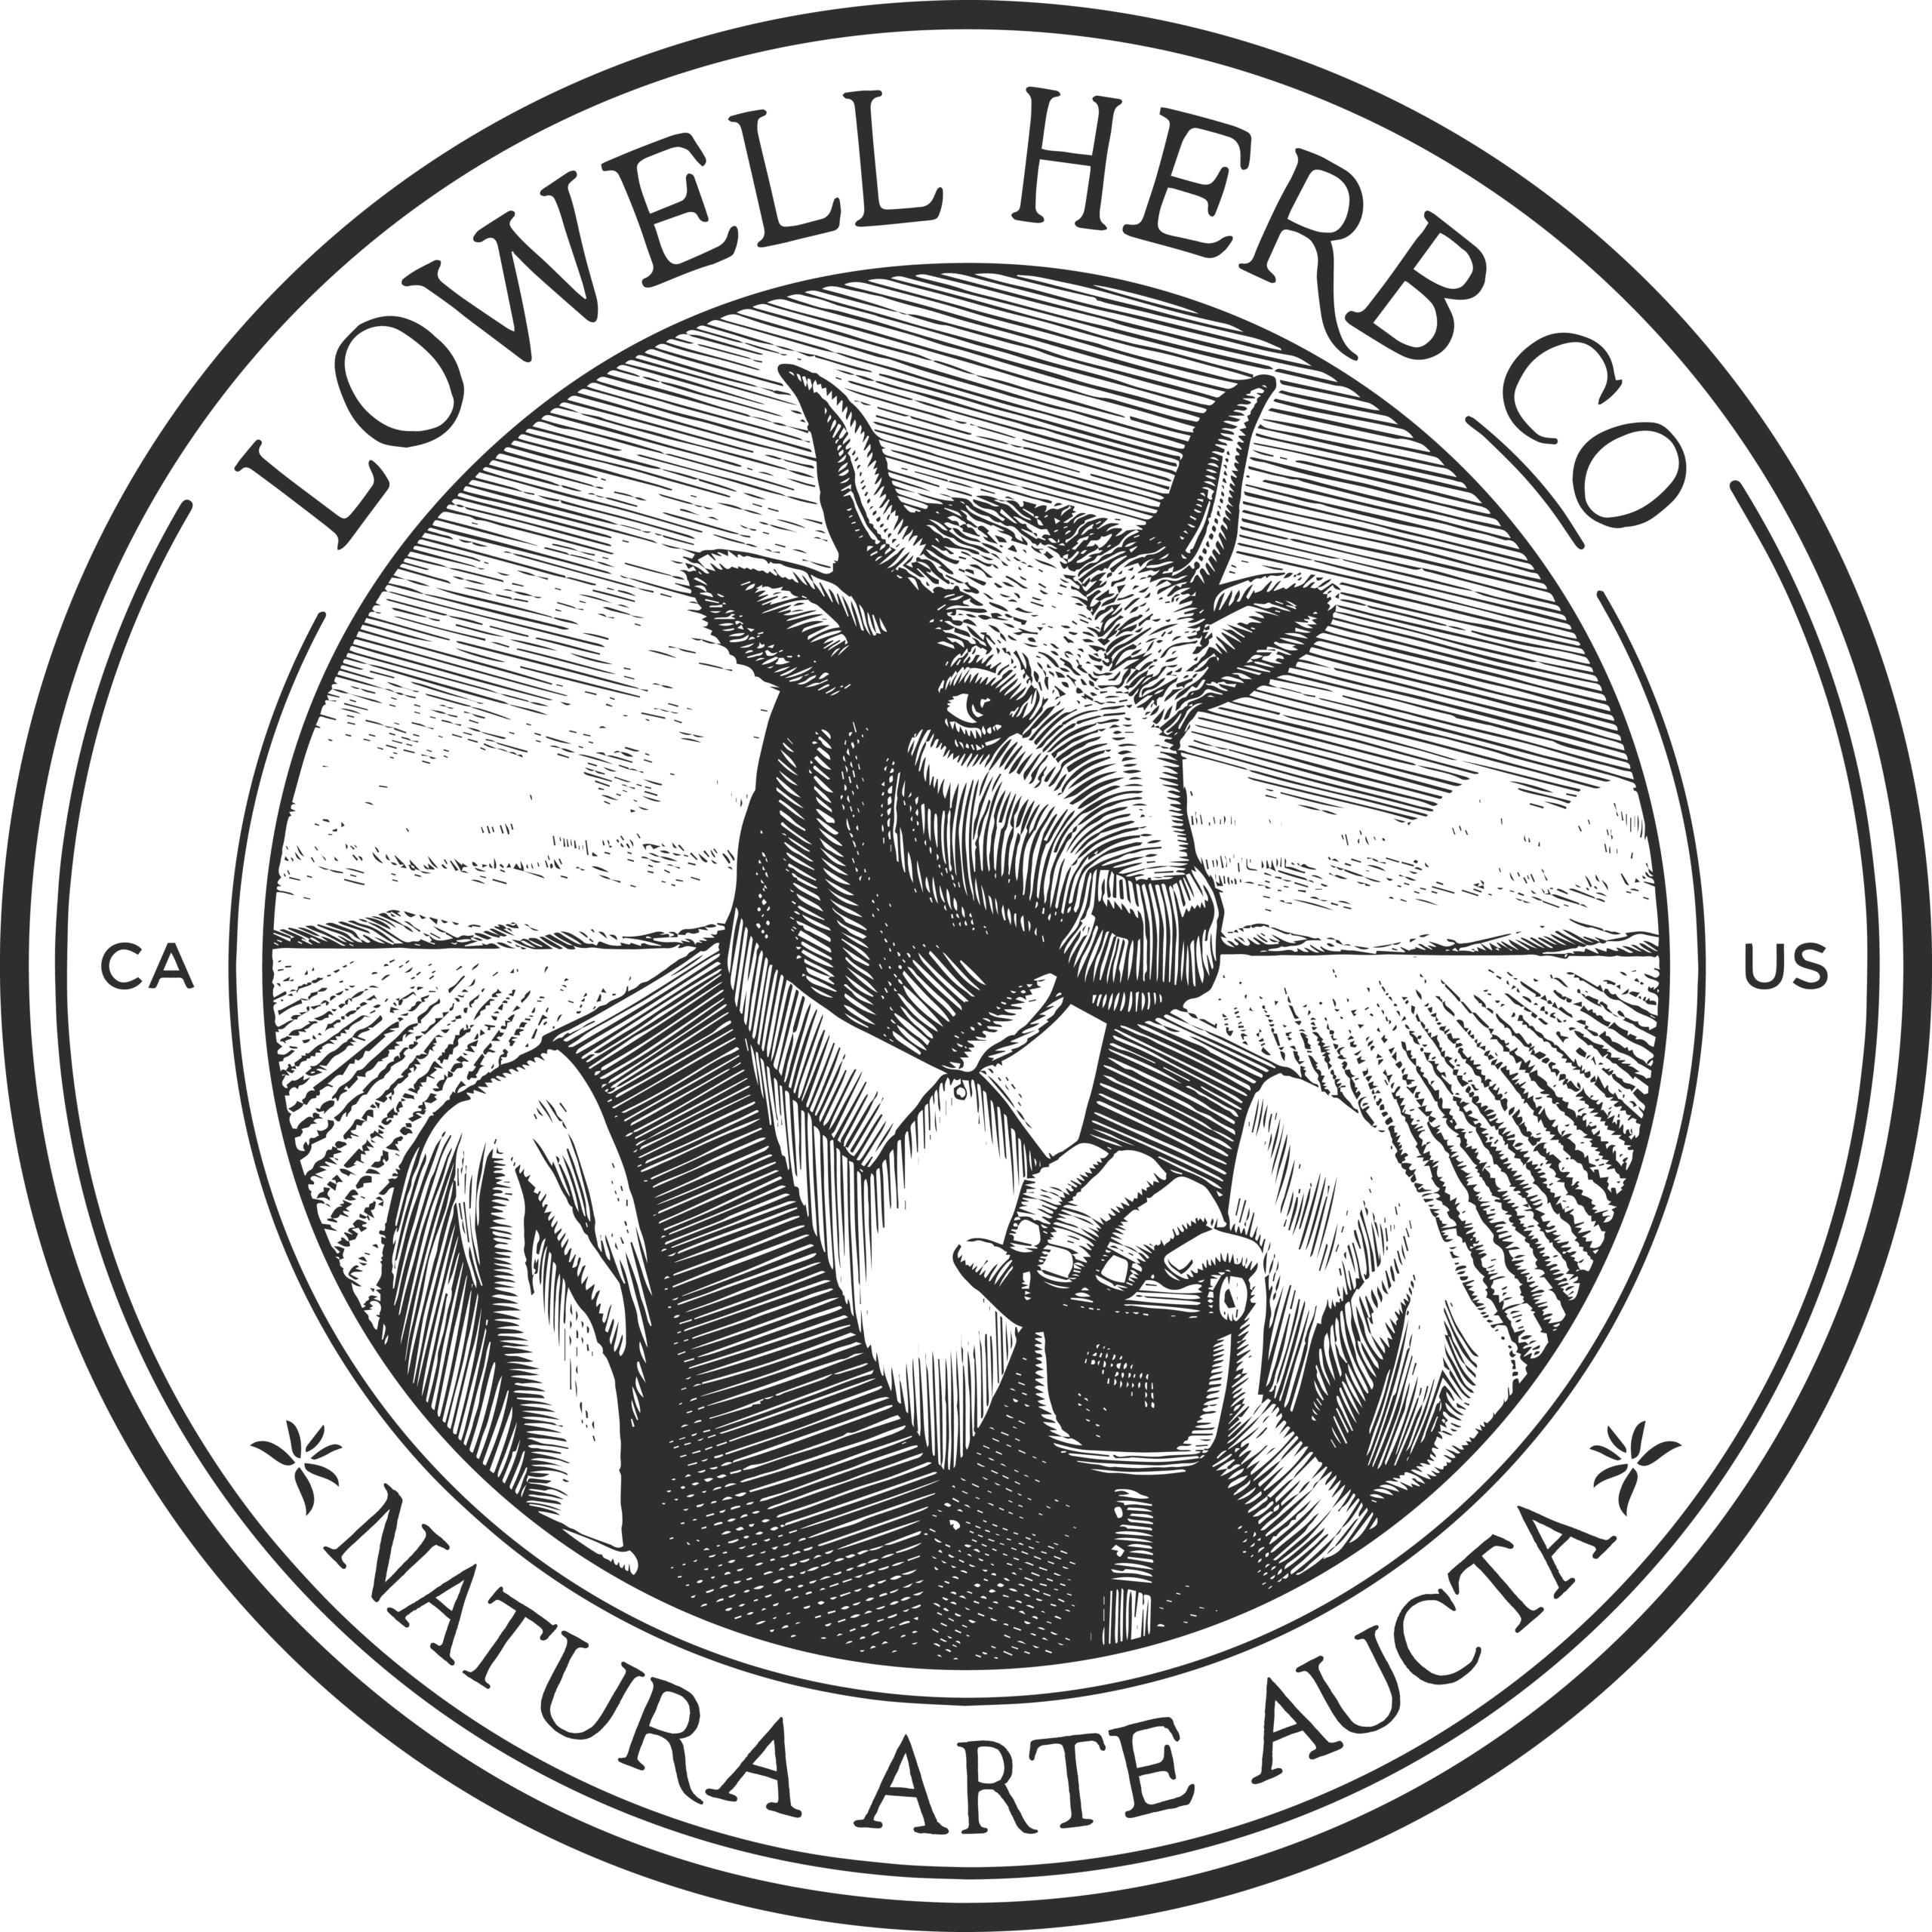 3. Lowell Herb Co. The Creative Sativa